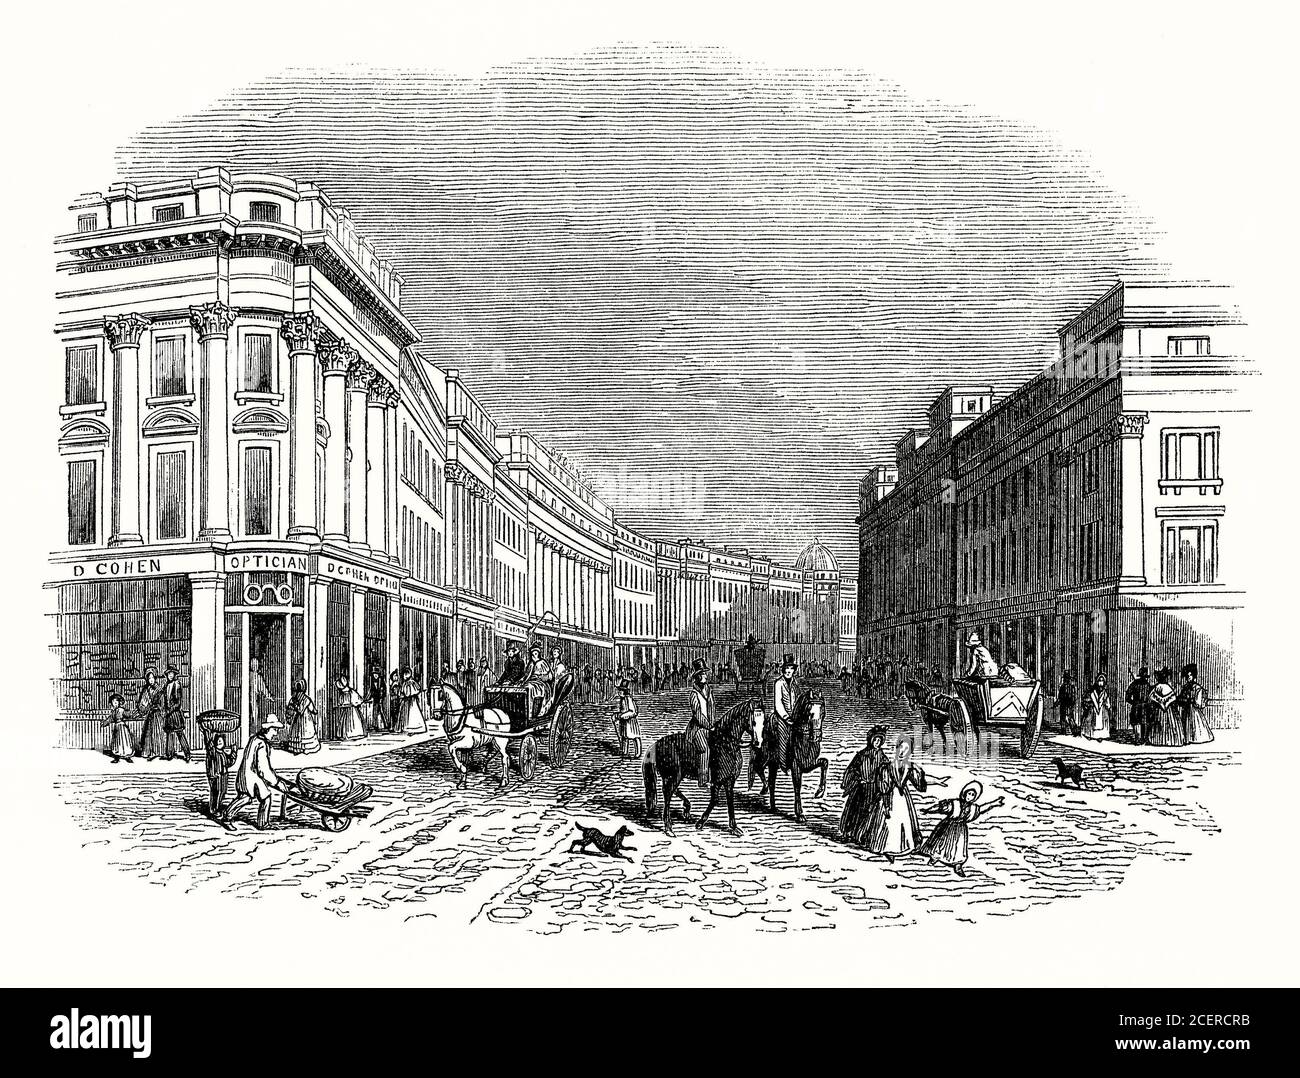 An old engraving of a busy street scene on Grey Street, Newcastle upon Tyne (commonly known as Newcastle), Tyne and Wear, England, UK during the Victorian era. Grainger Town is the historic heart of Newcastle incorporating classical streets built by Richard Grainger, a builder and developer, between 1824 and 1841. Some of Newcastle's finest buildings and streets lie within the Grainger Town area including Grey Street and Grainger Street and the architecture is dubbed 'Tyneside Classical' architecture. Stock Photo